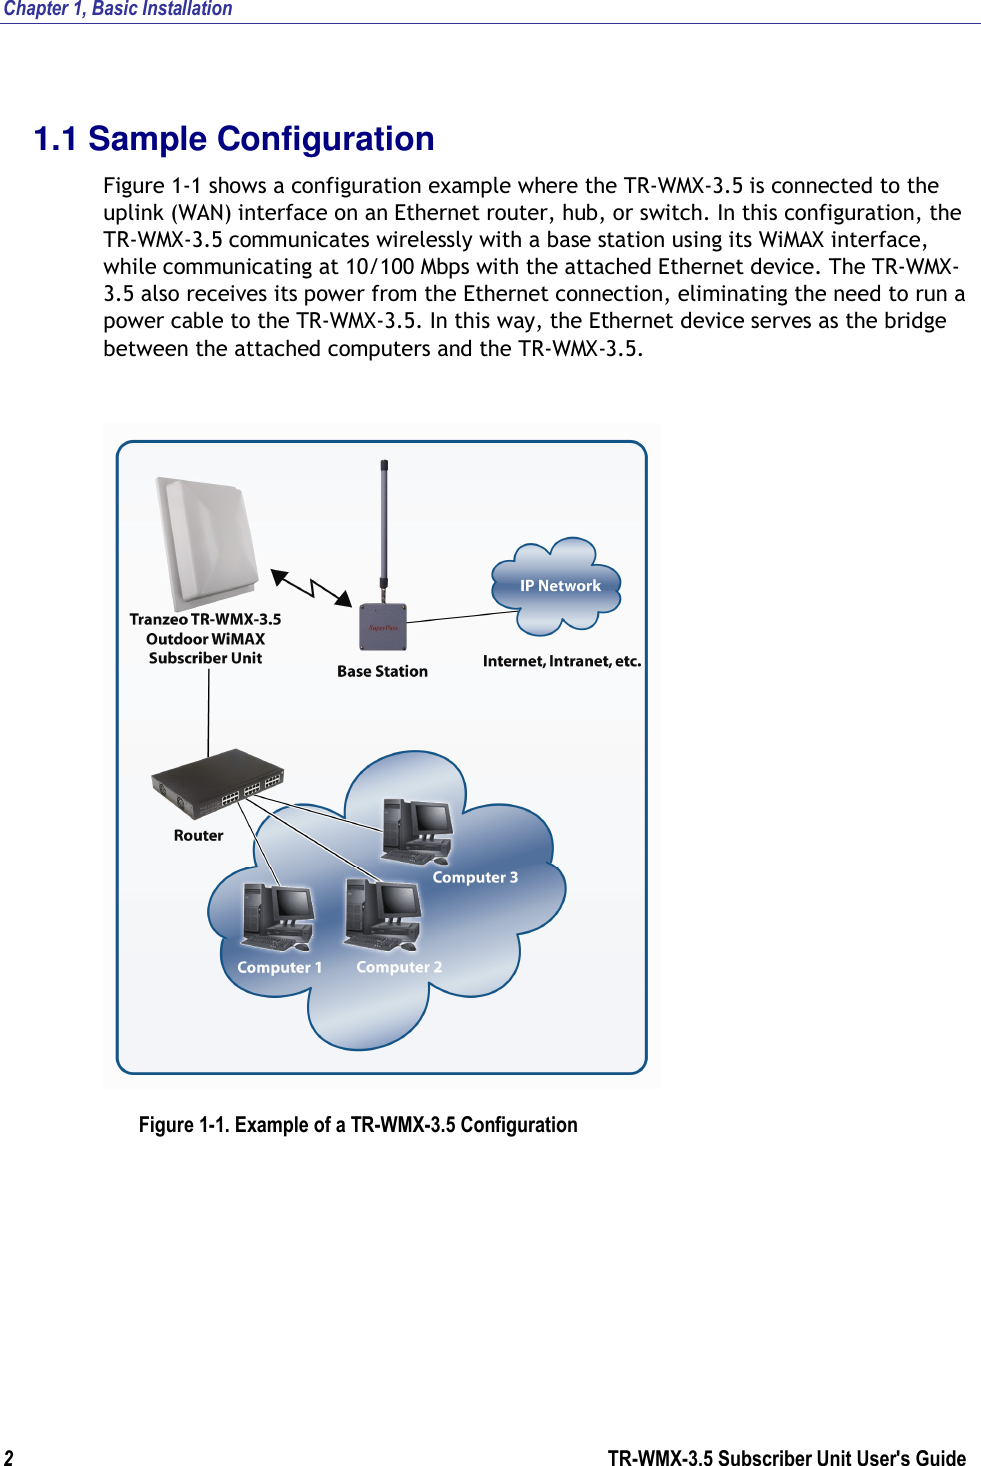 Chapter 1, Basic Installation  2                      TR-WMX-3.5 Subscriber Unit User&apos;s Guide  1.1 Sample Configuration Figure 1-1 shows a configuration example where the TR-WMX-3.5 is connected to the uplink (WAN) interface on an Ethernet router, hub, or switch. In this configuration, the TR-WMX-3.5 communicates wirelessly with a base station using its WiMAX interface, while communicating at 10/100 Mbps with the attached Ethernet device. The TR-WMX-3.5 also receives its power from the Ethernet connection, eliminating the need to run a power cable to the TR-WMX-3.5. In this way, the Ethernet device serves as the bridge between the attached computers and the TR-WMX-3.5.  Figure 1-1. Example of a TR-WMX-3.5 Configuration 